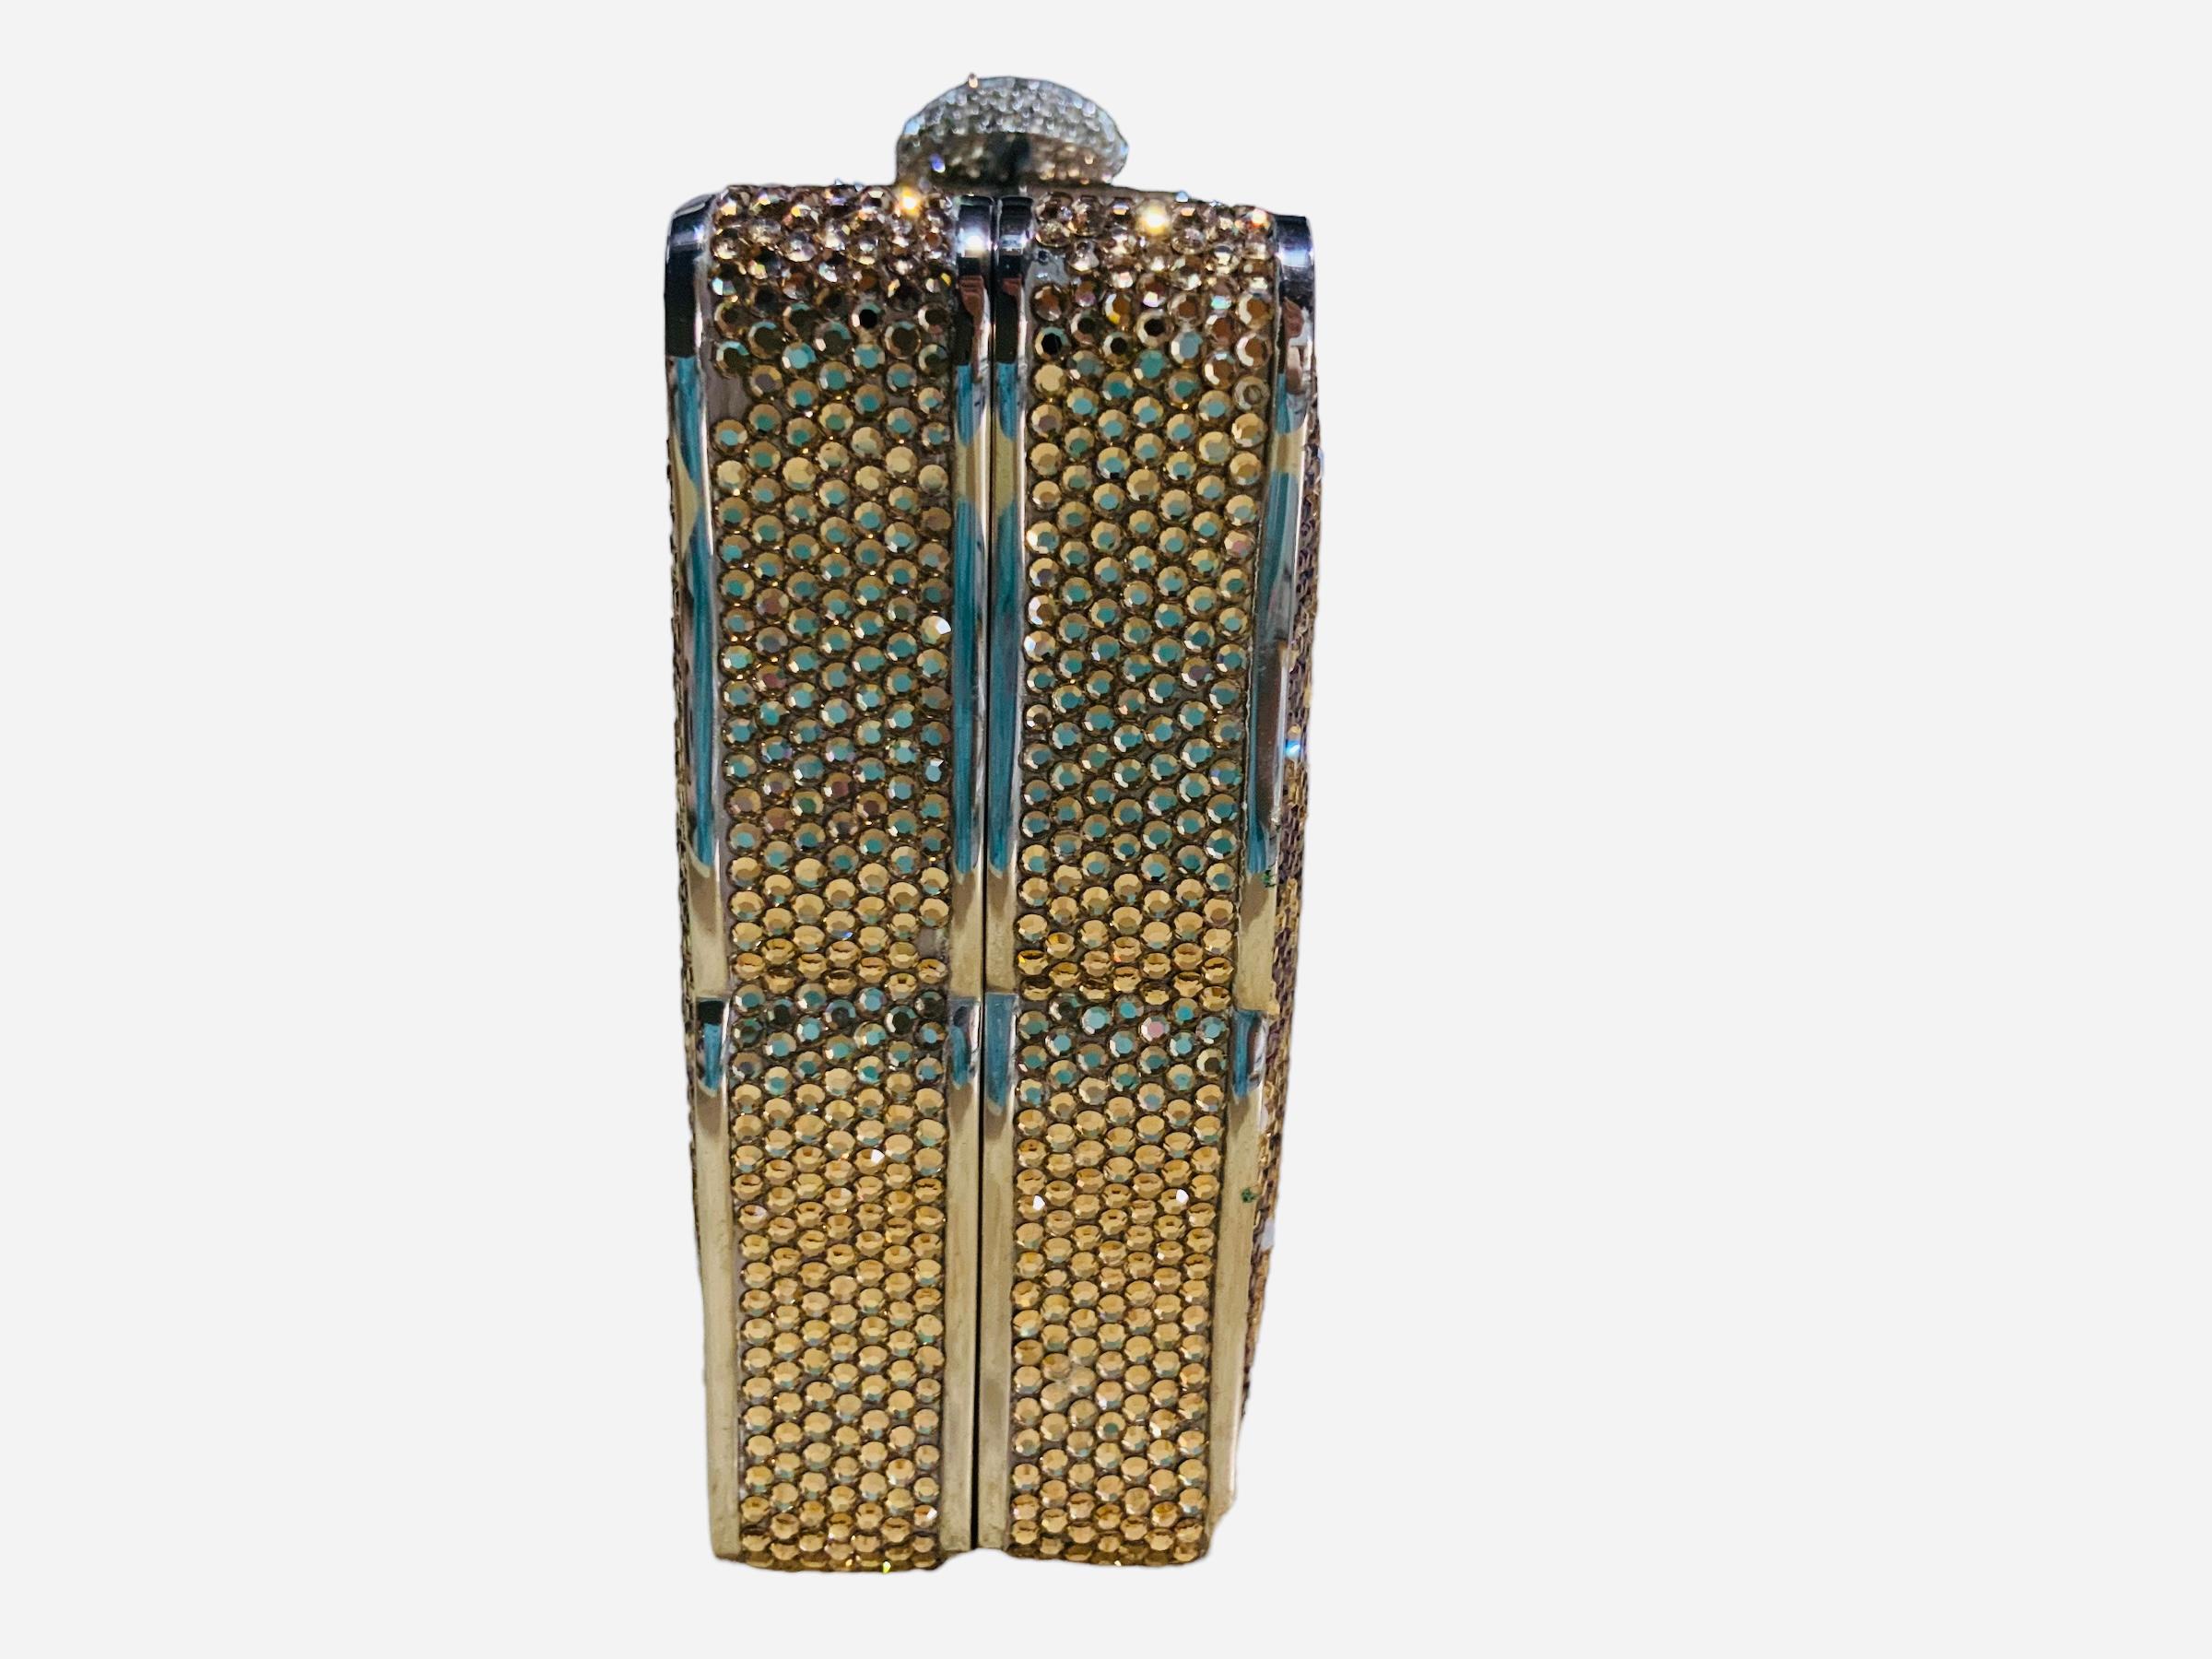 This is a Judith Leiber Swarovski Crystals Minaudiere / Clutch. It depicts a rectangular silver tone metal shaped minaudiere adorned with a large rose flower with green leaves. Large long scrolls also framed the right side of the front and back of